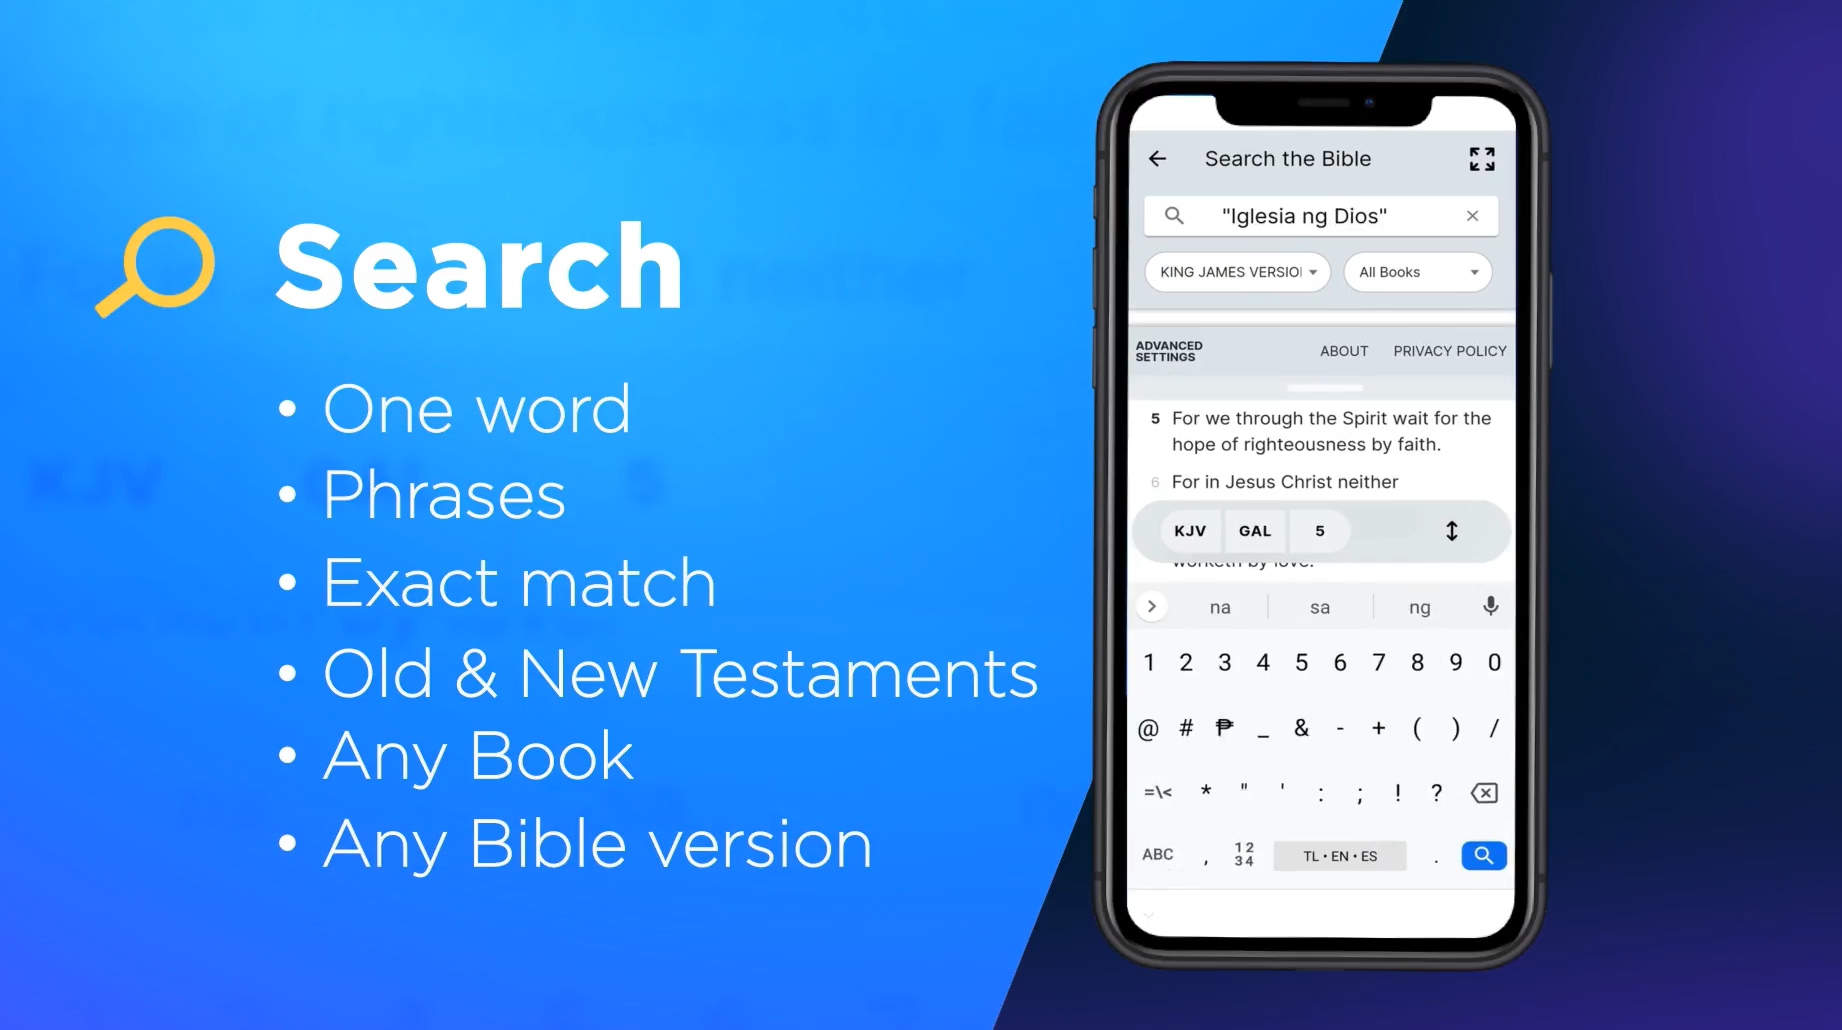 The image lists down the search feature of the Digital Bible app